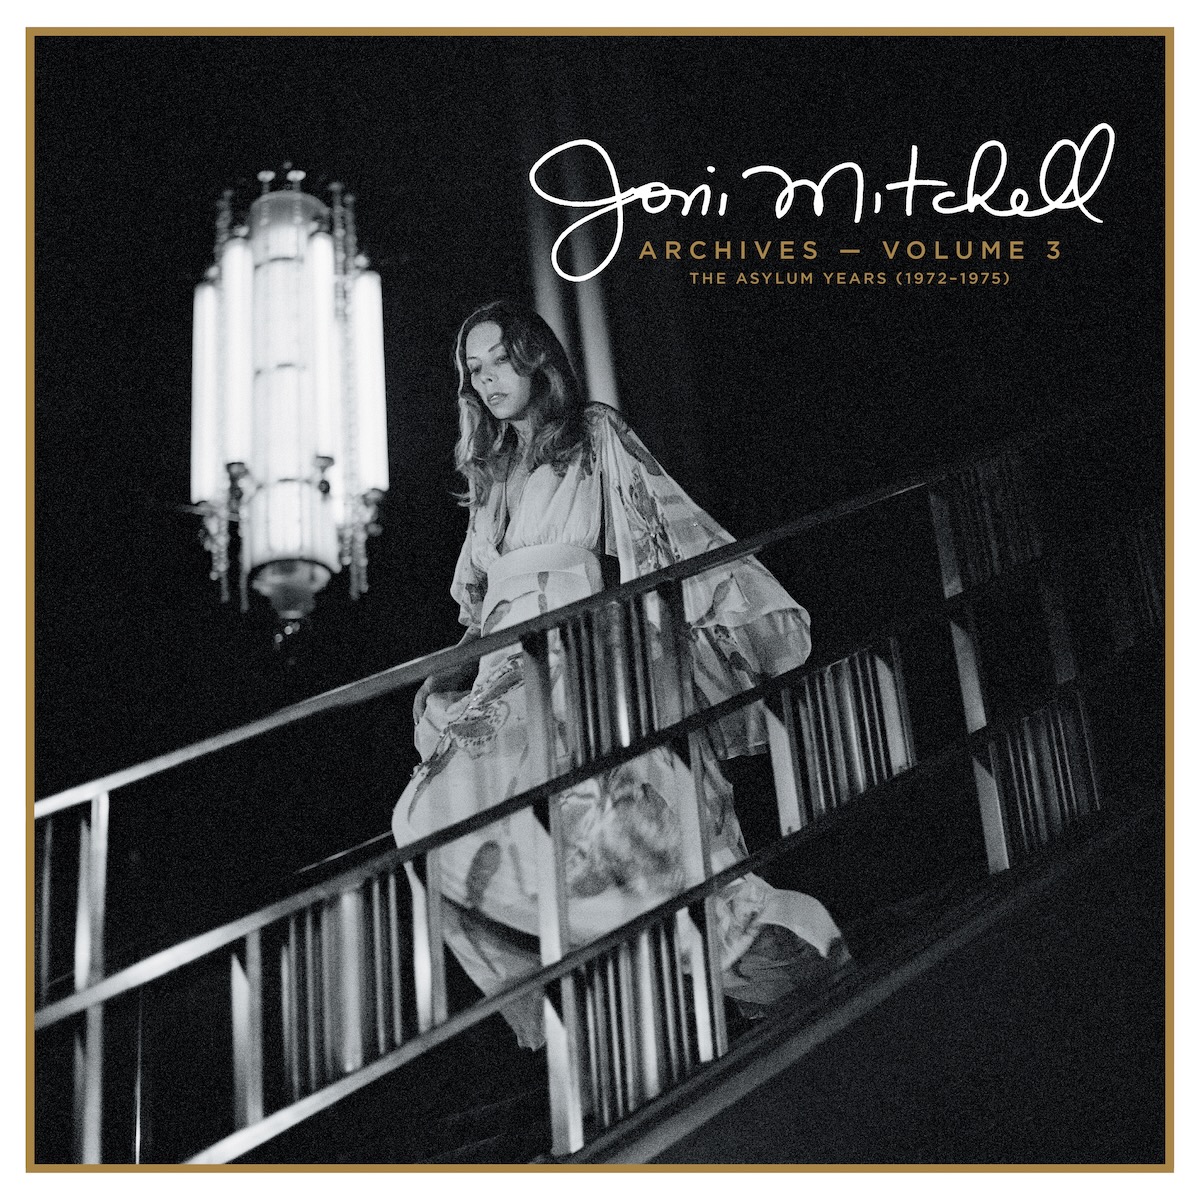 ALBUM REVIEW: Third Archive Collection Finds Joni Mitchell